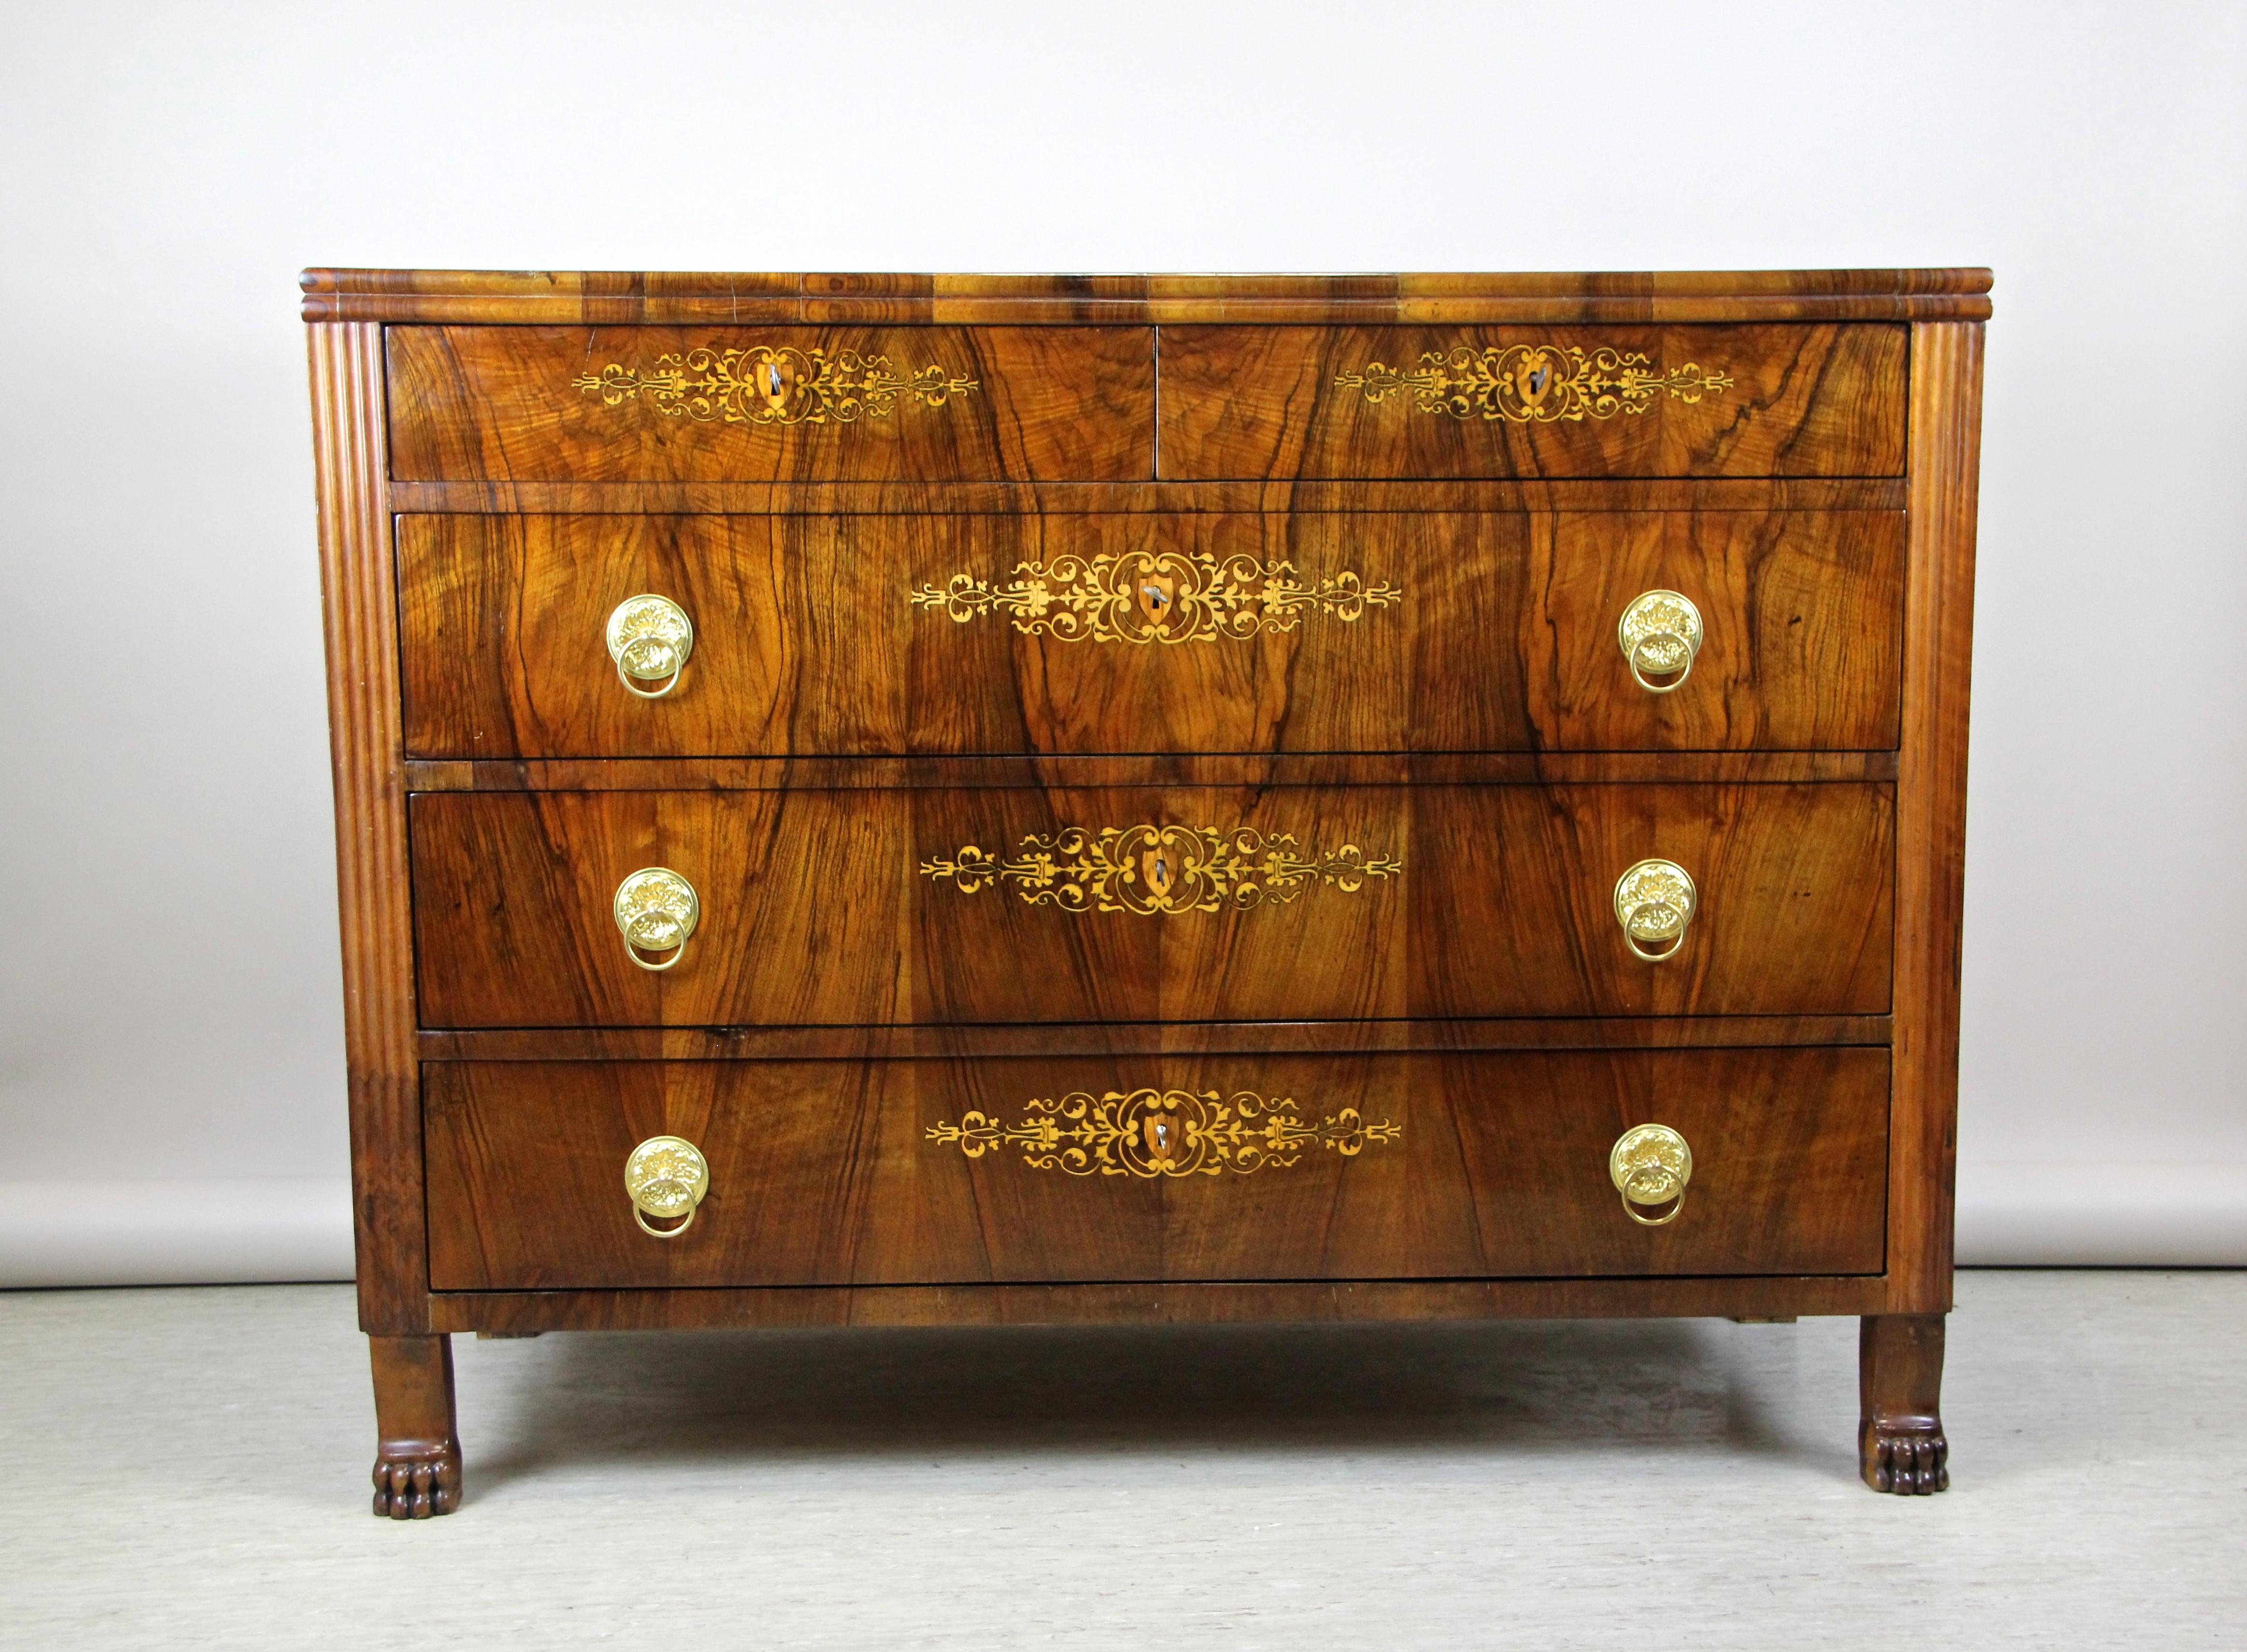 Dreamlike early 19th century chest of drawers from the famous Biedermeier era in Hungary circa 1830. A real majestic commode impressing with straight lines and eye-catching inlay works on the front of the drawers. Also the great bookmatched walnut